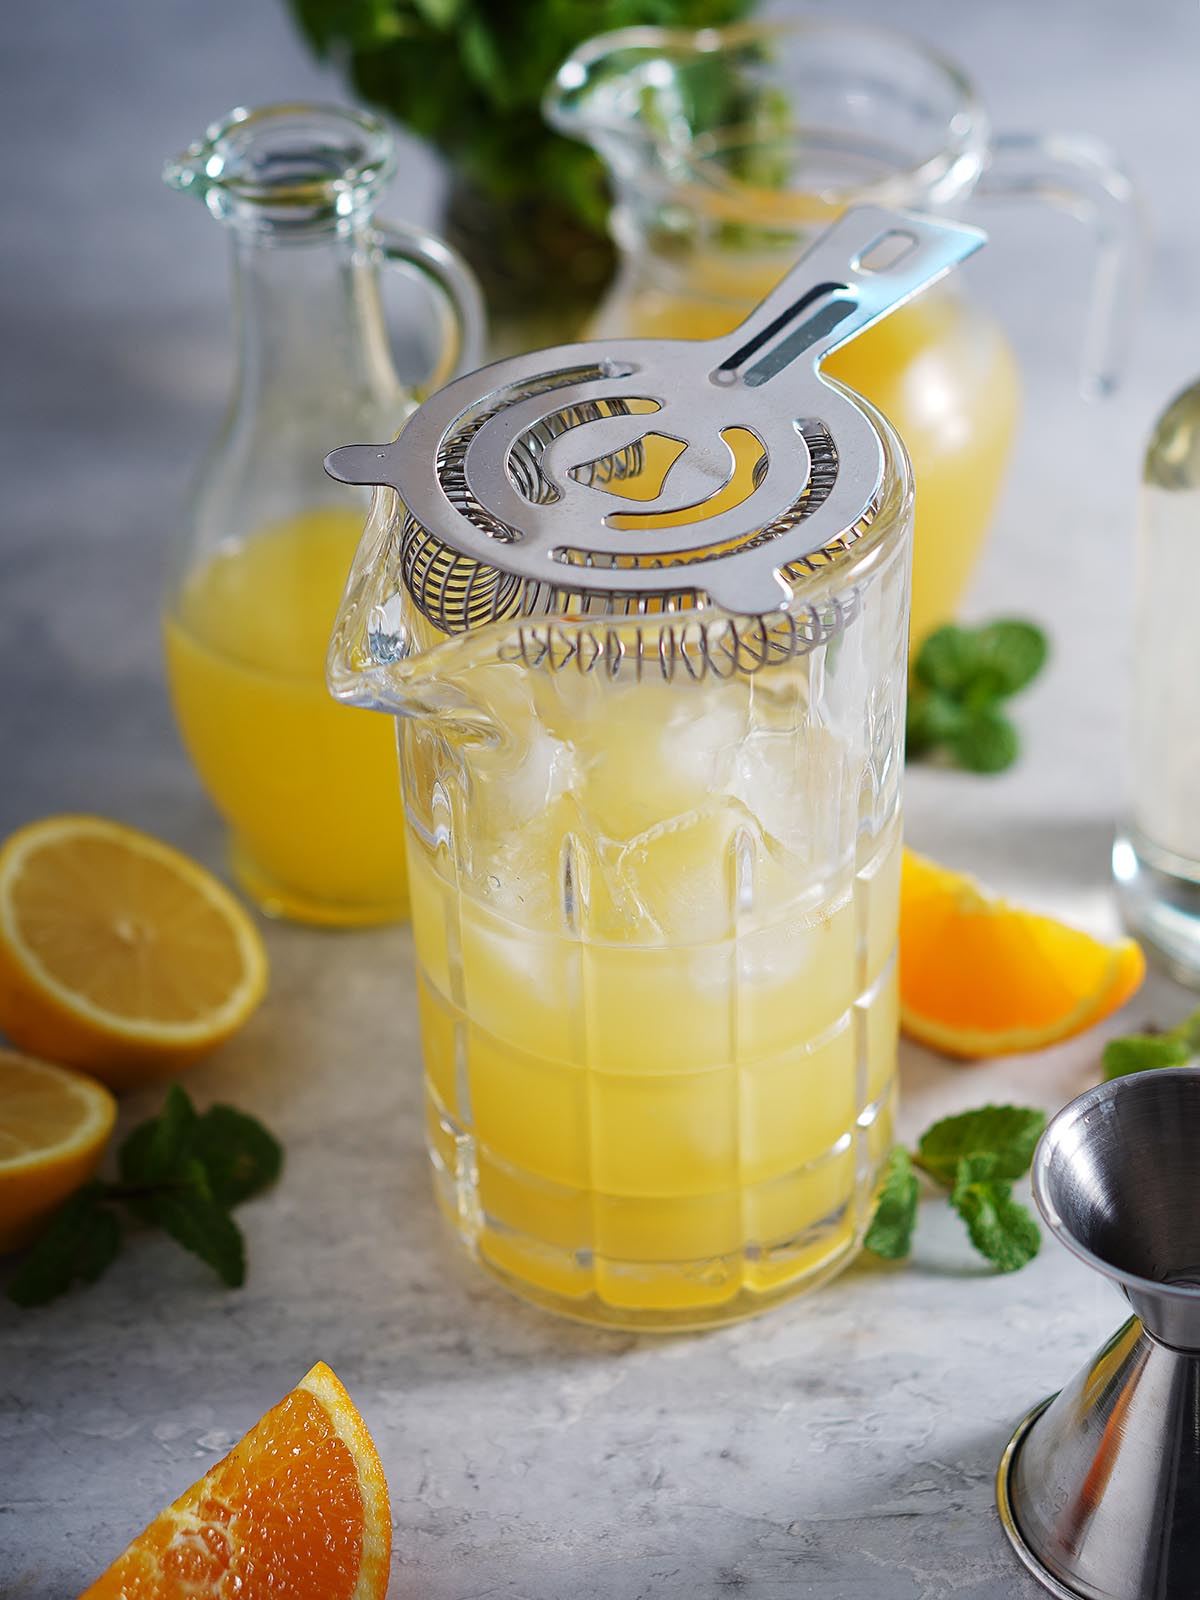 A cocktail shaker with a cocktail mix of orange and lemon juice.